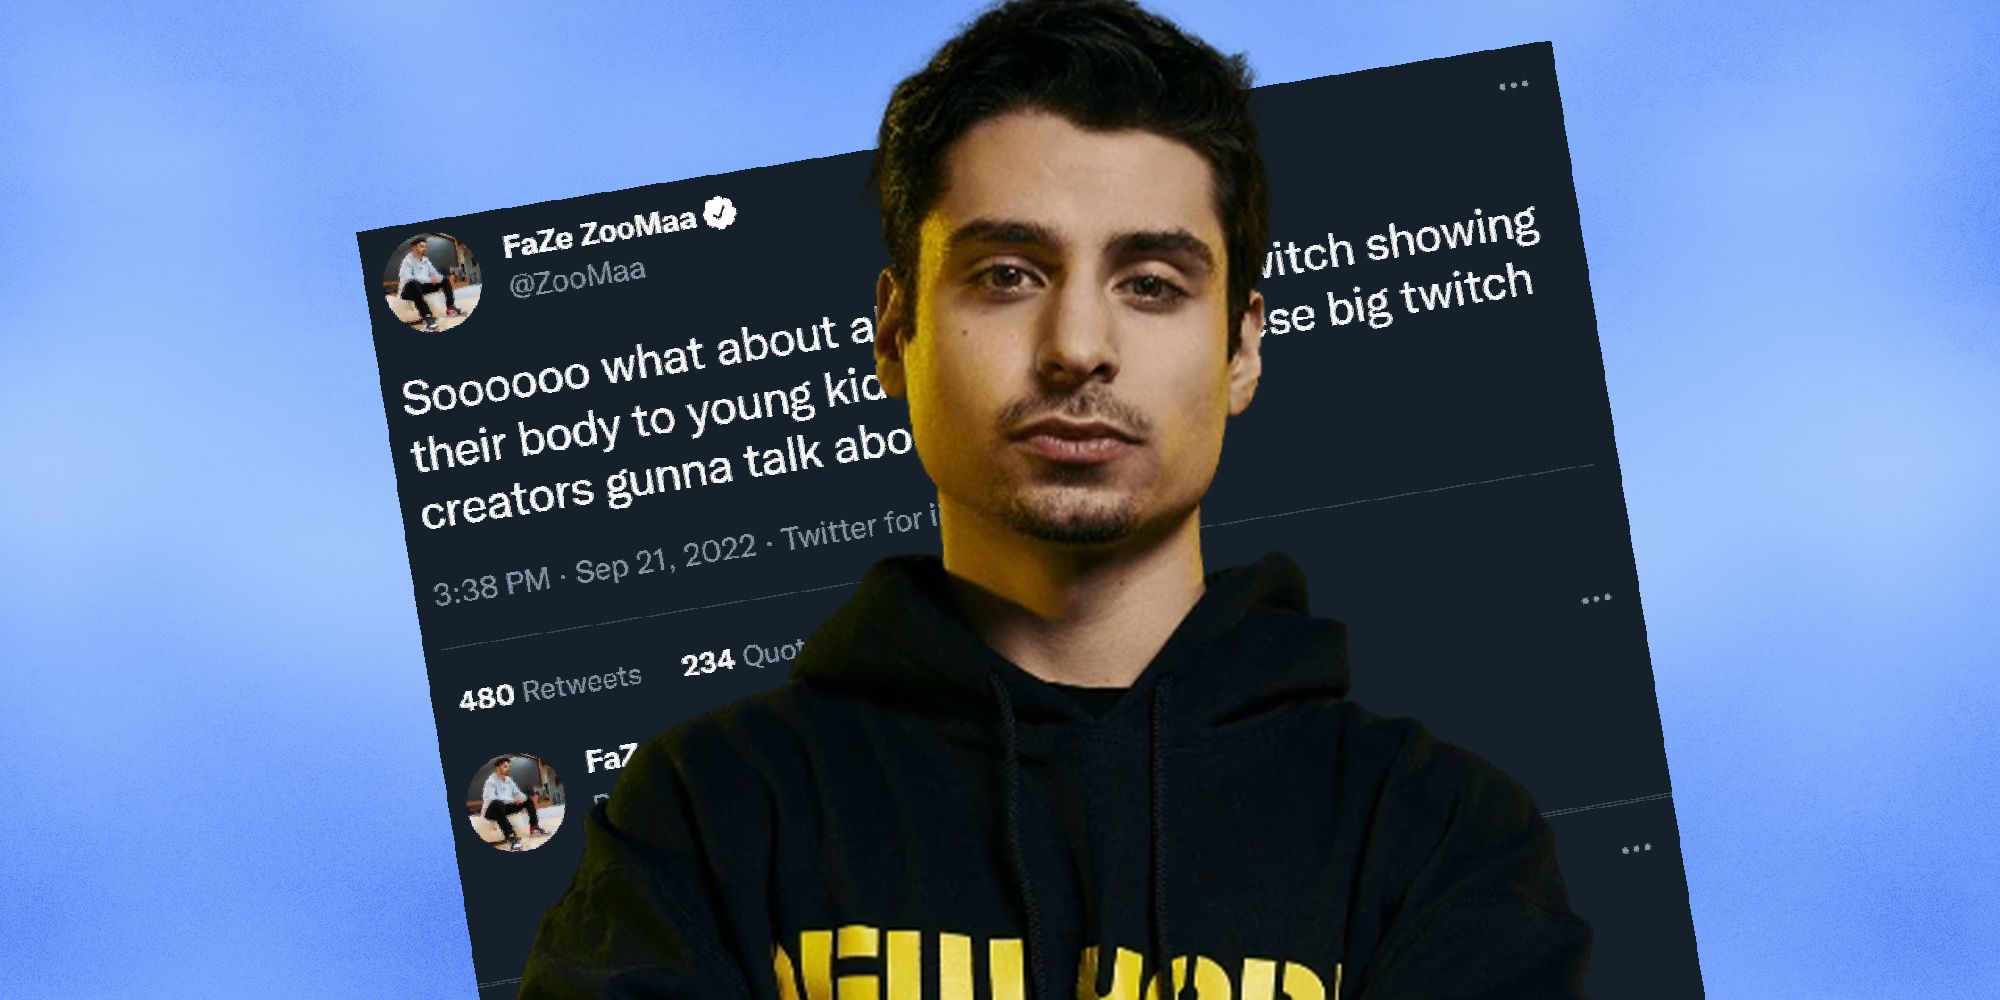 Faze Zooma in front of his sexist tweet